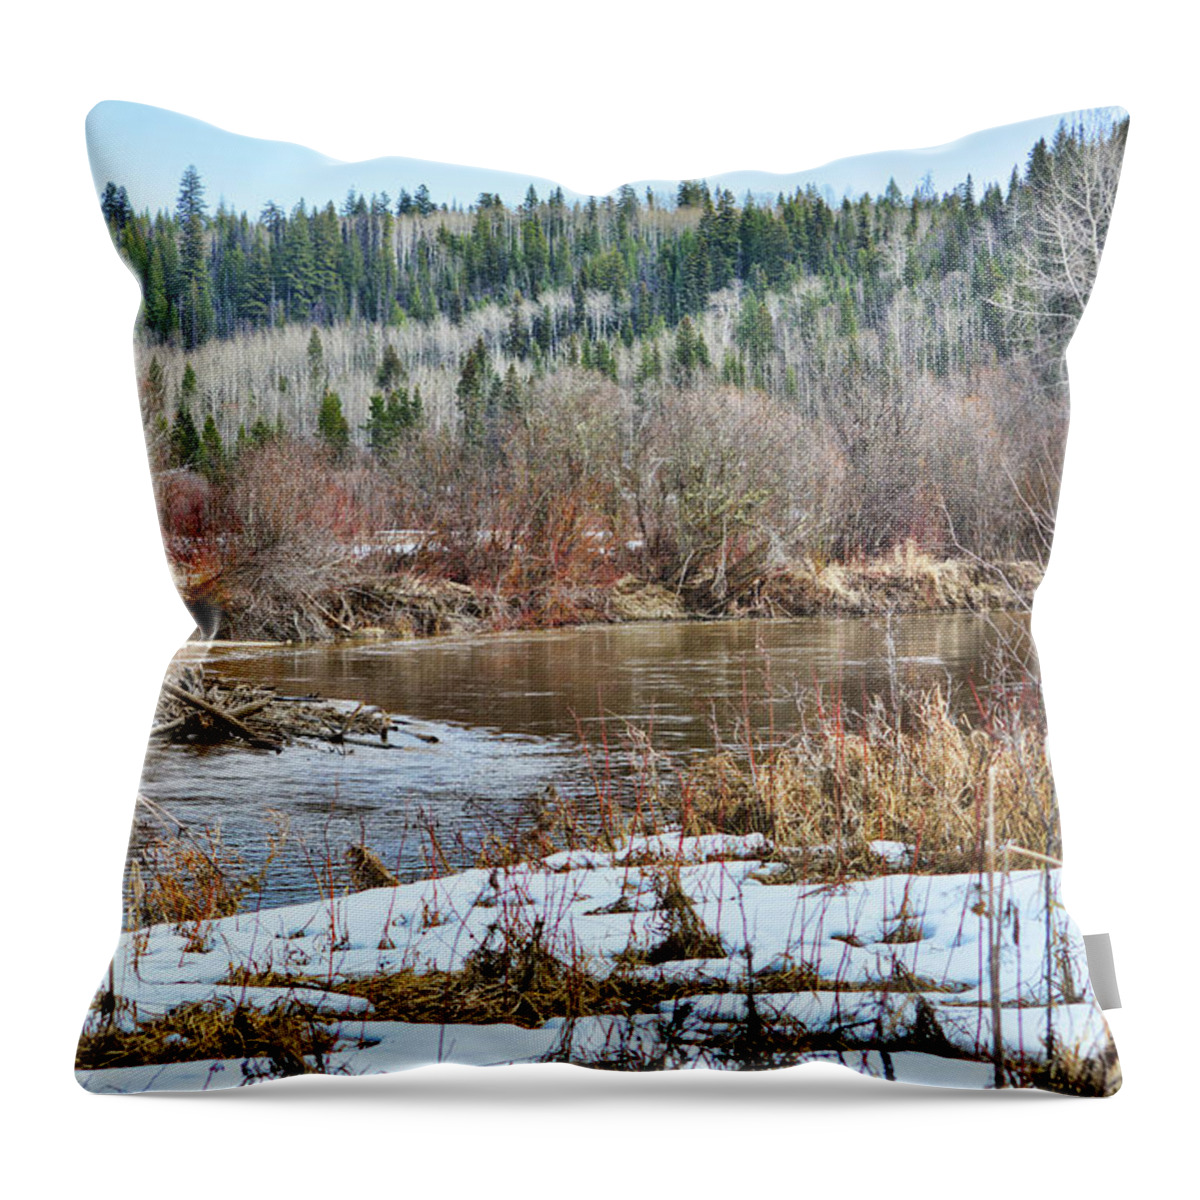 Storm Throw Pillow featuring the photograph Calm Waters by Vivian Martin